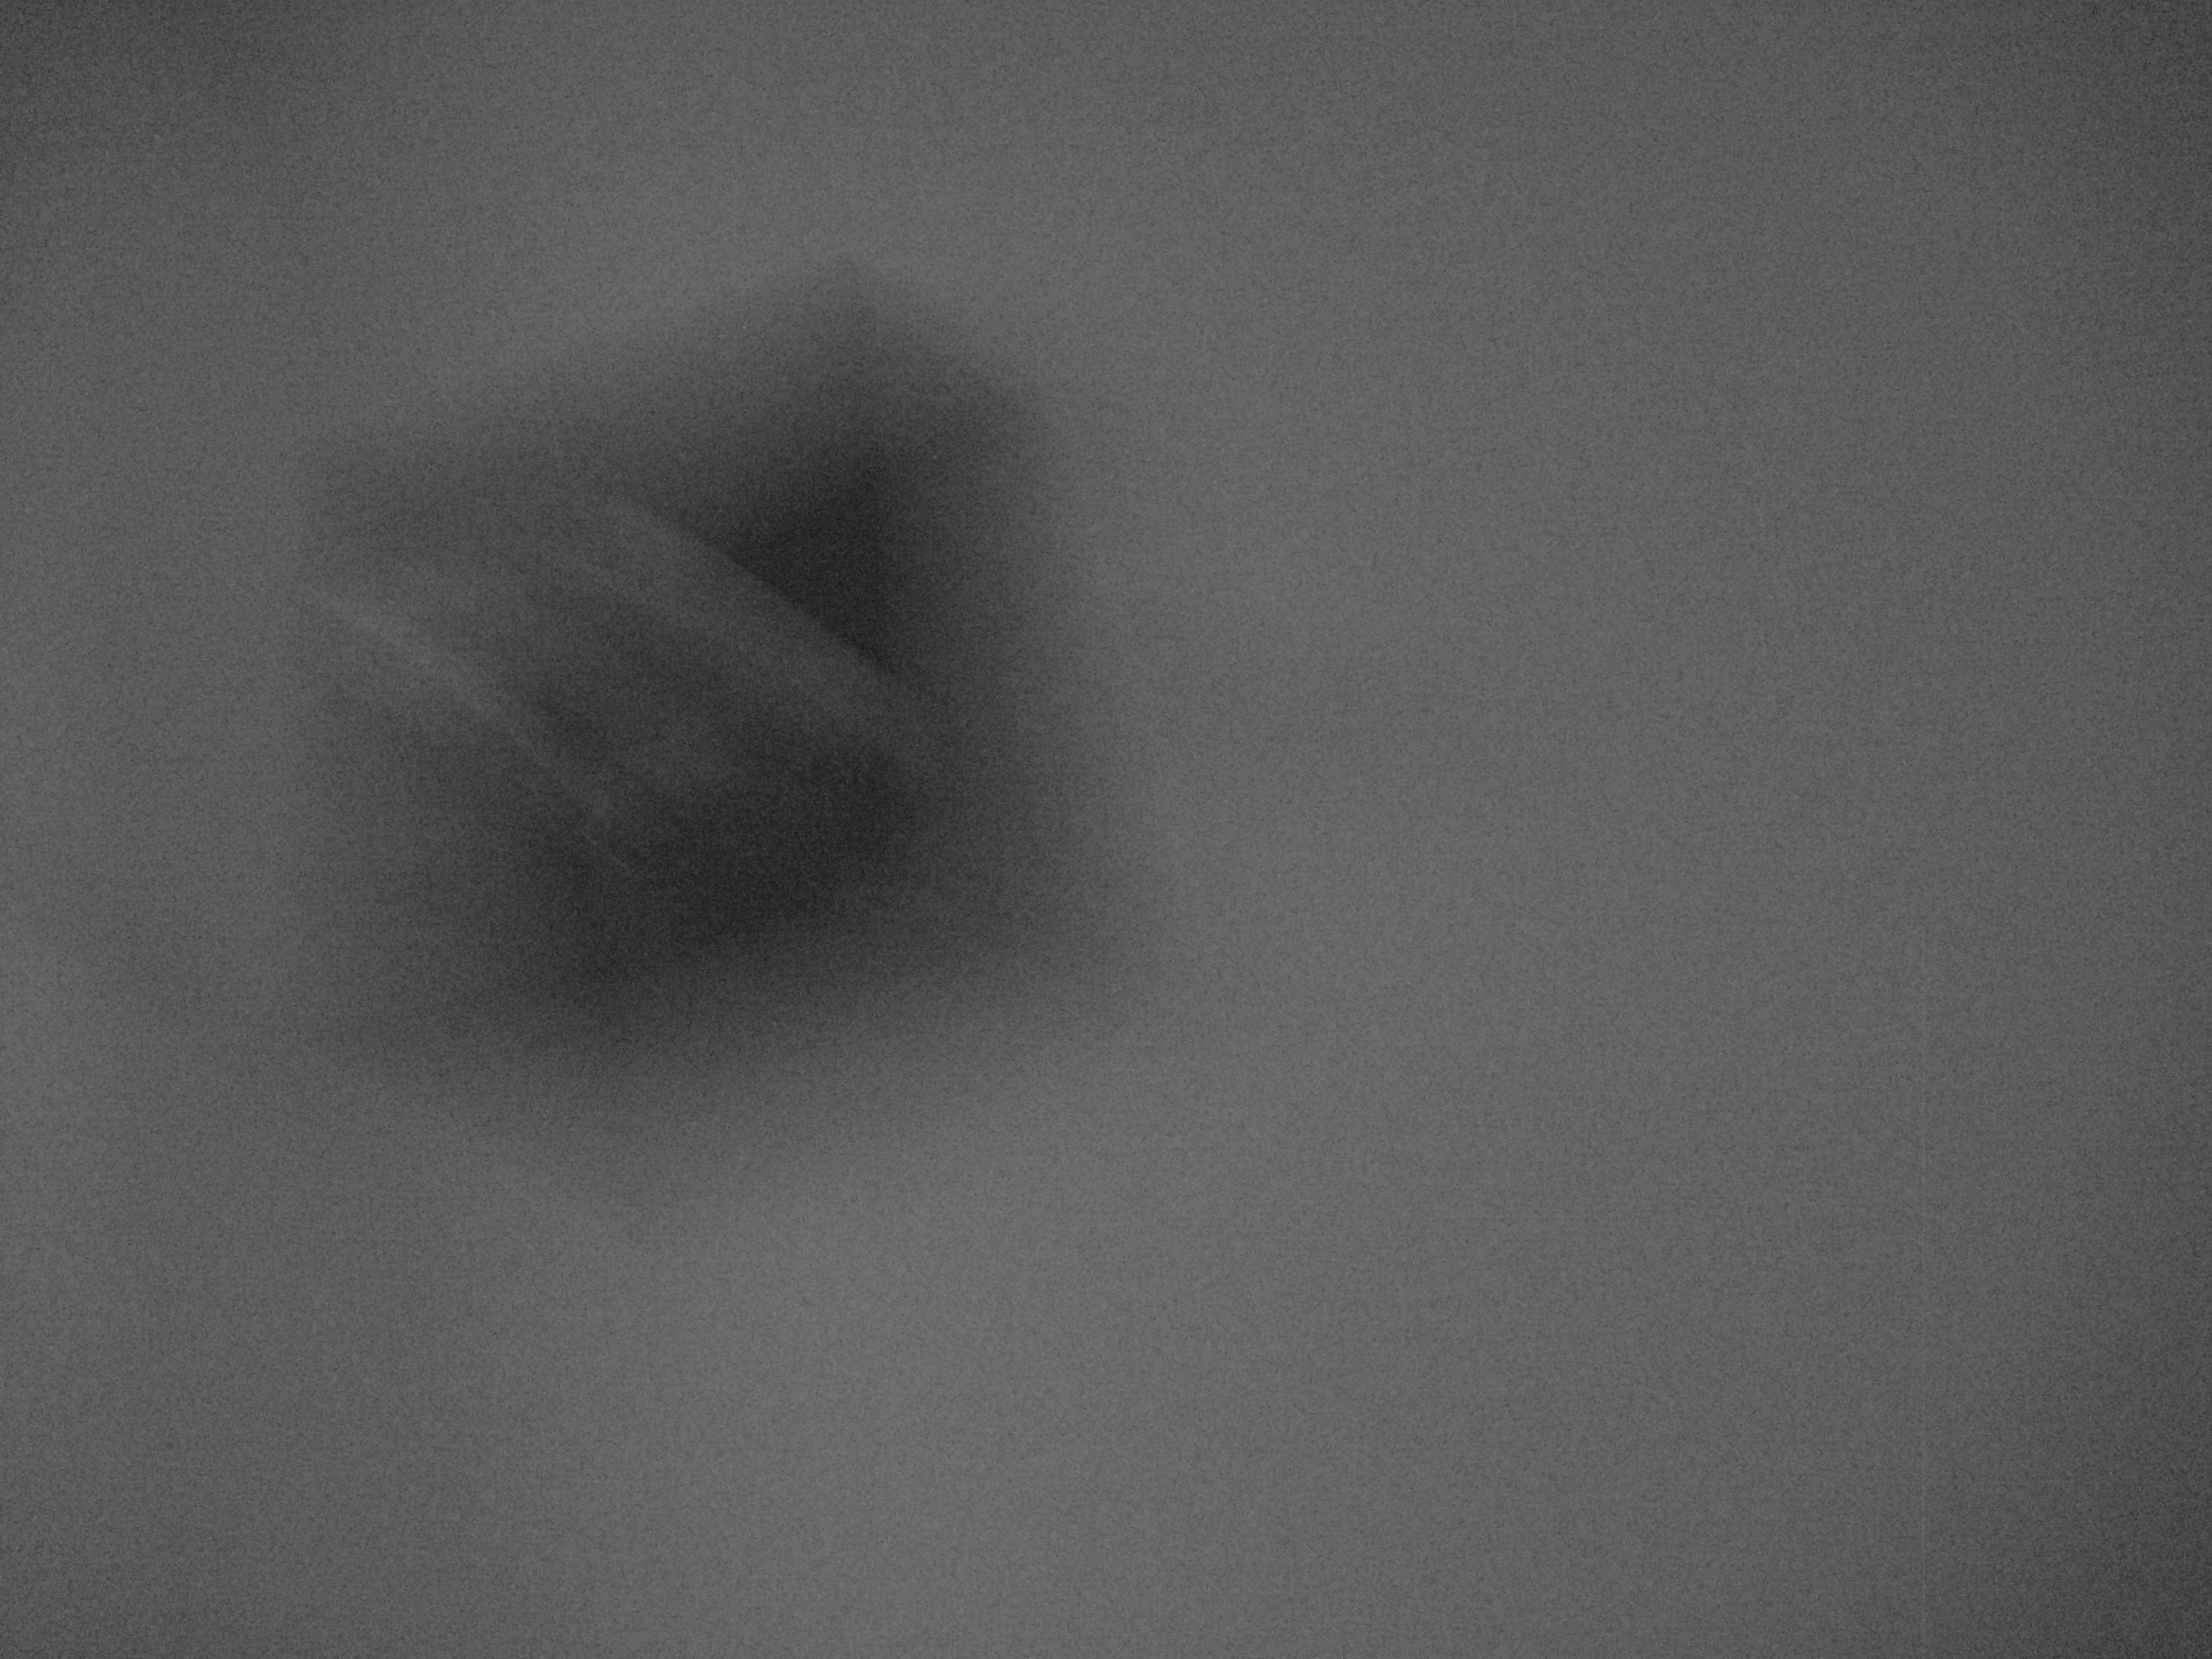 Abstract Room Photography 4